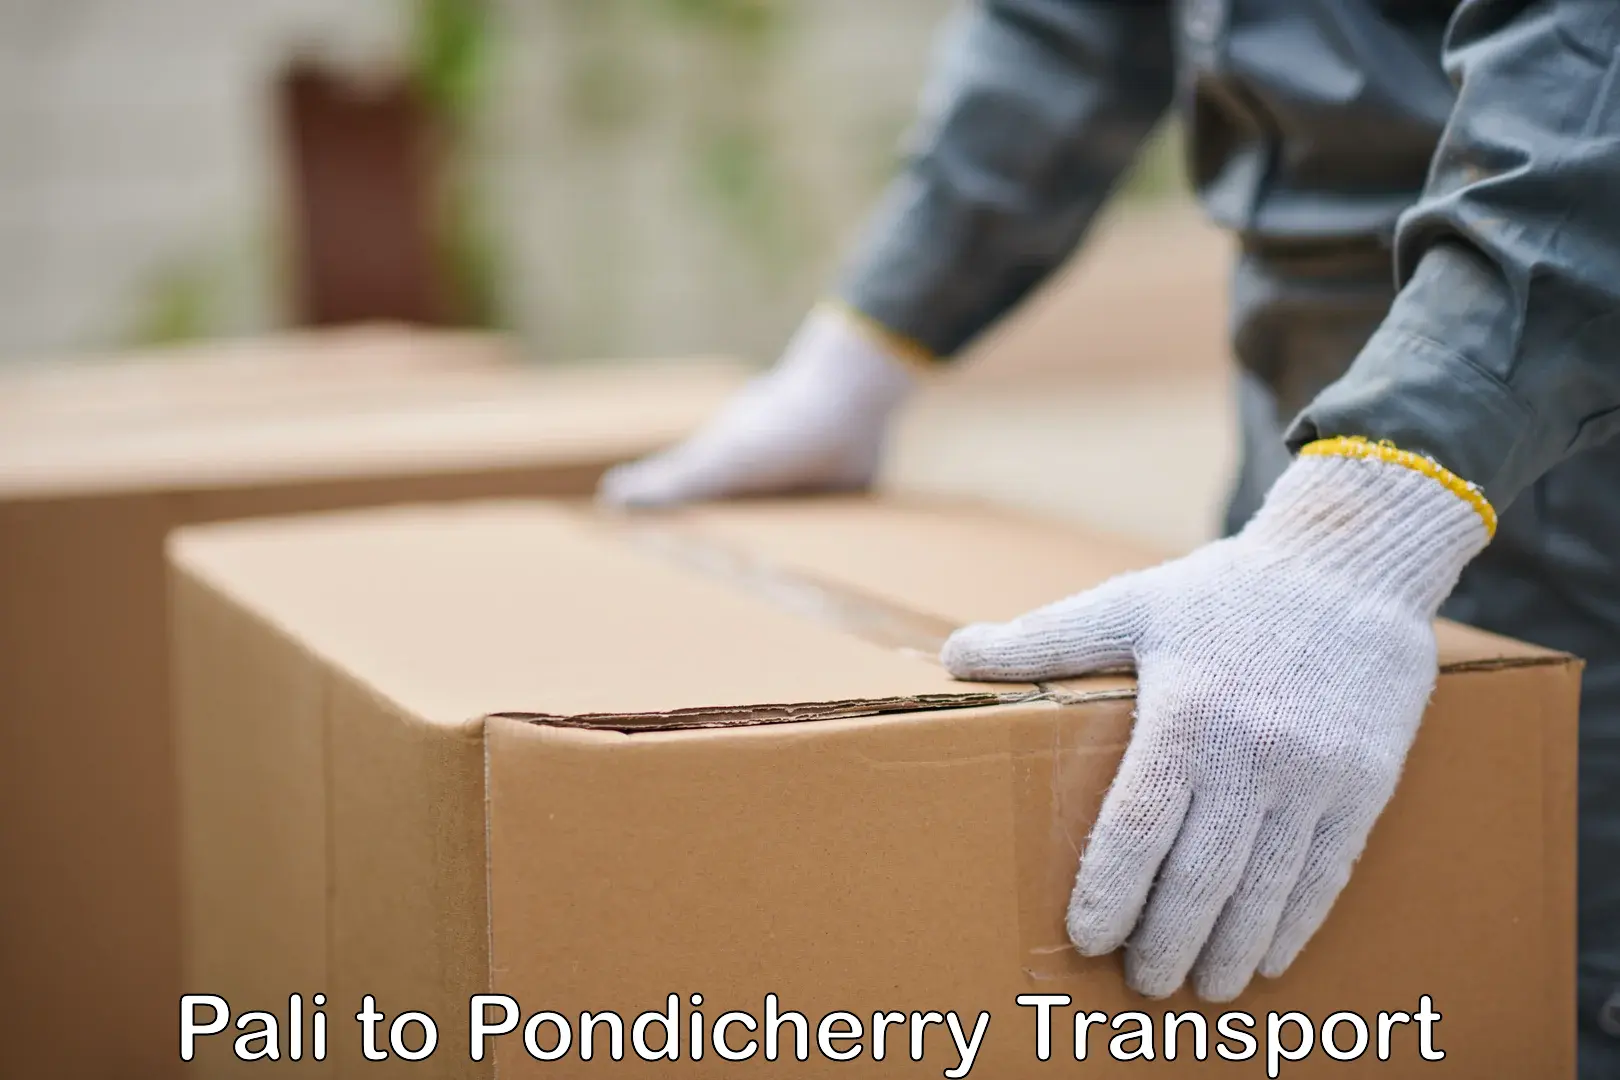 Goods delivery service Pali to Pondicherry